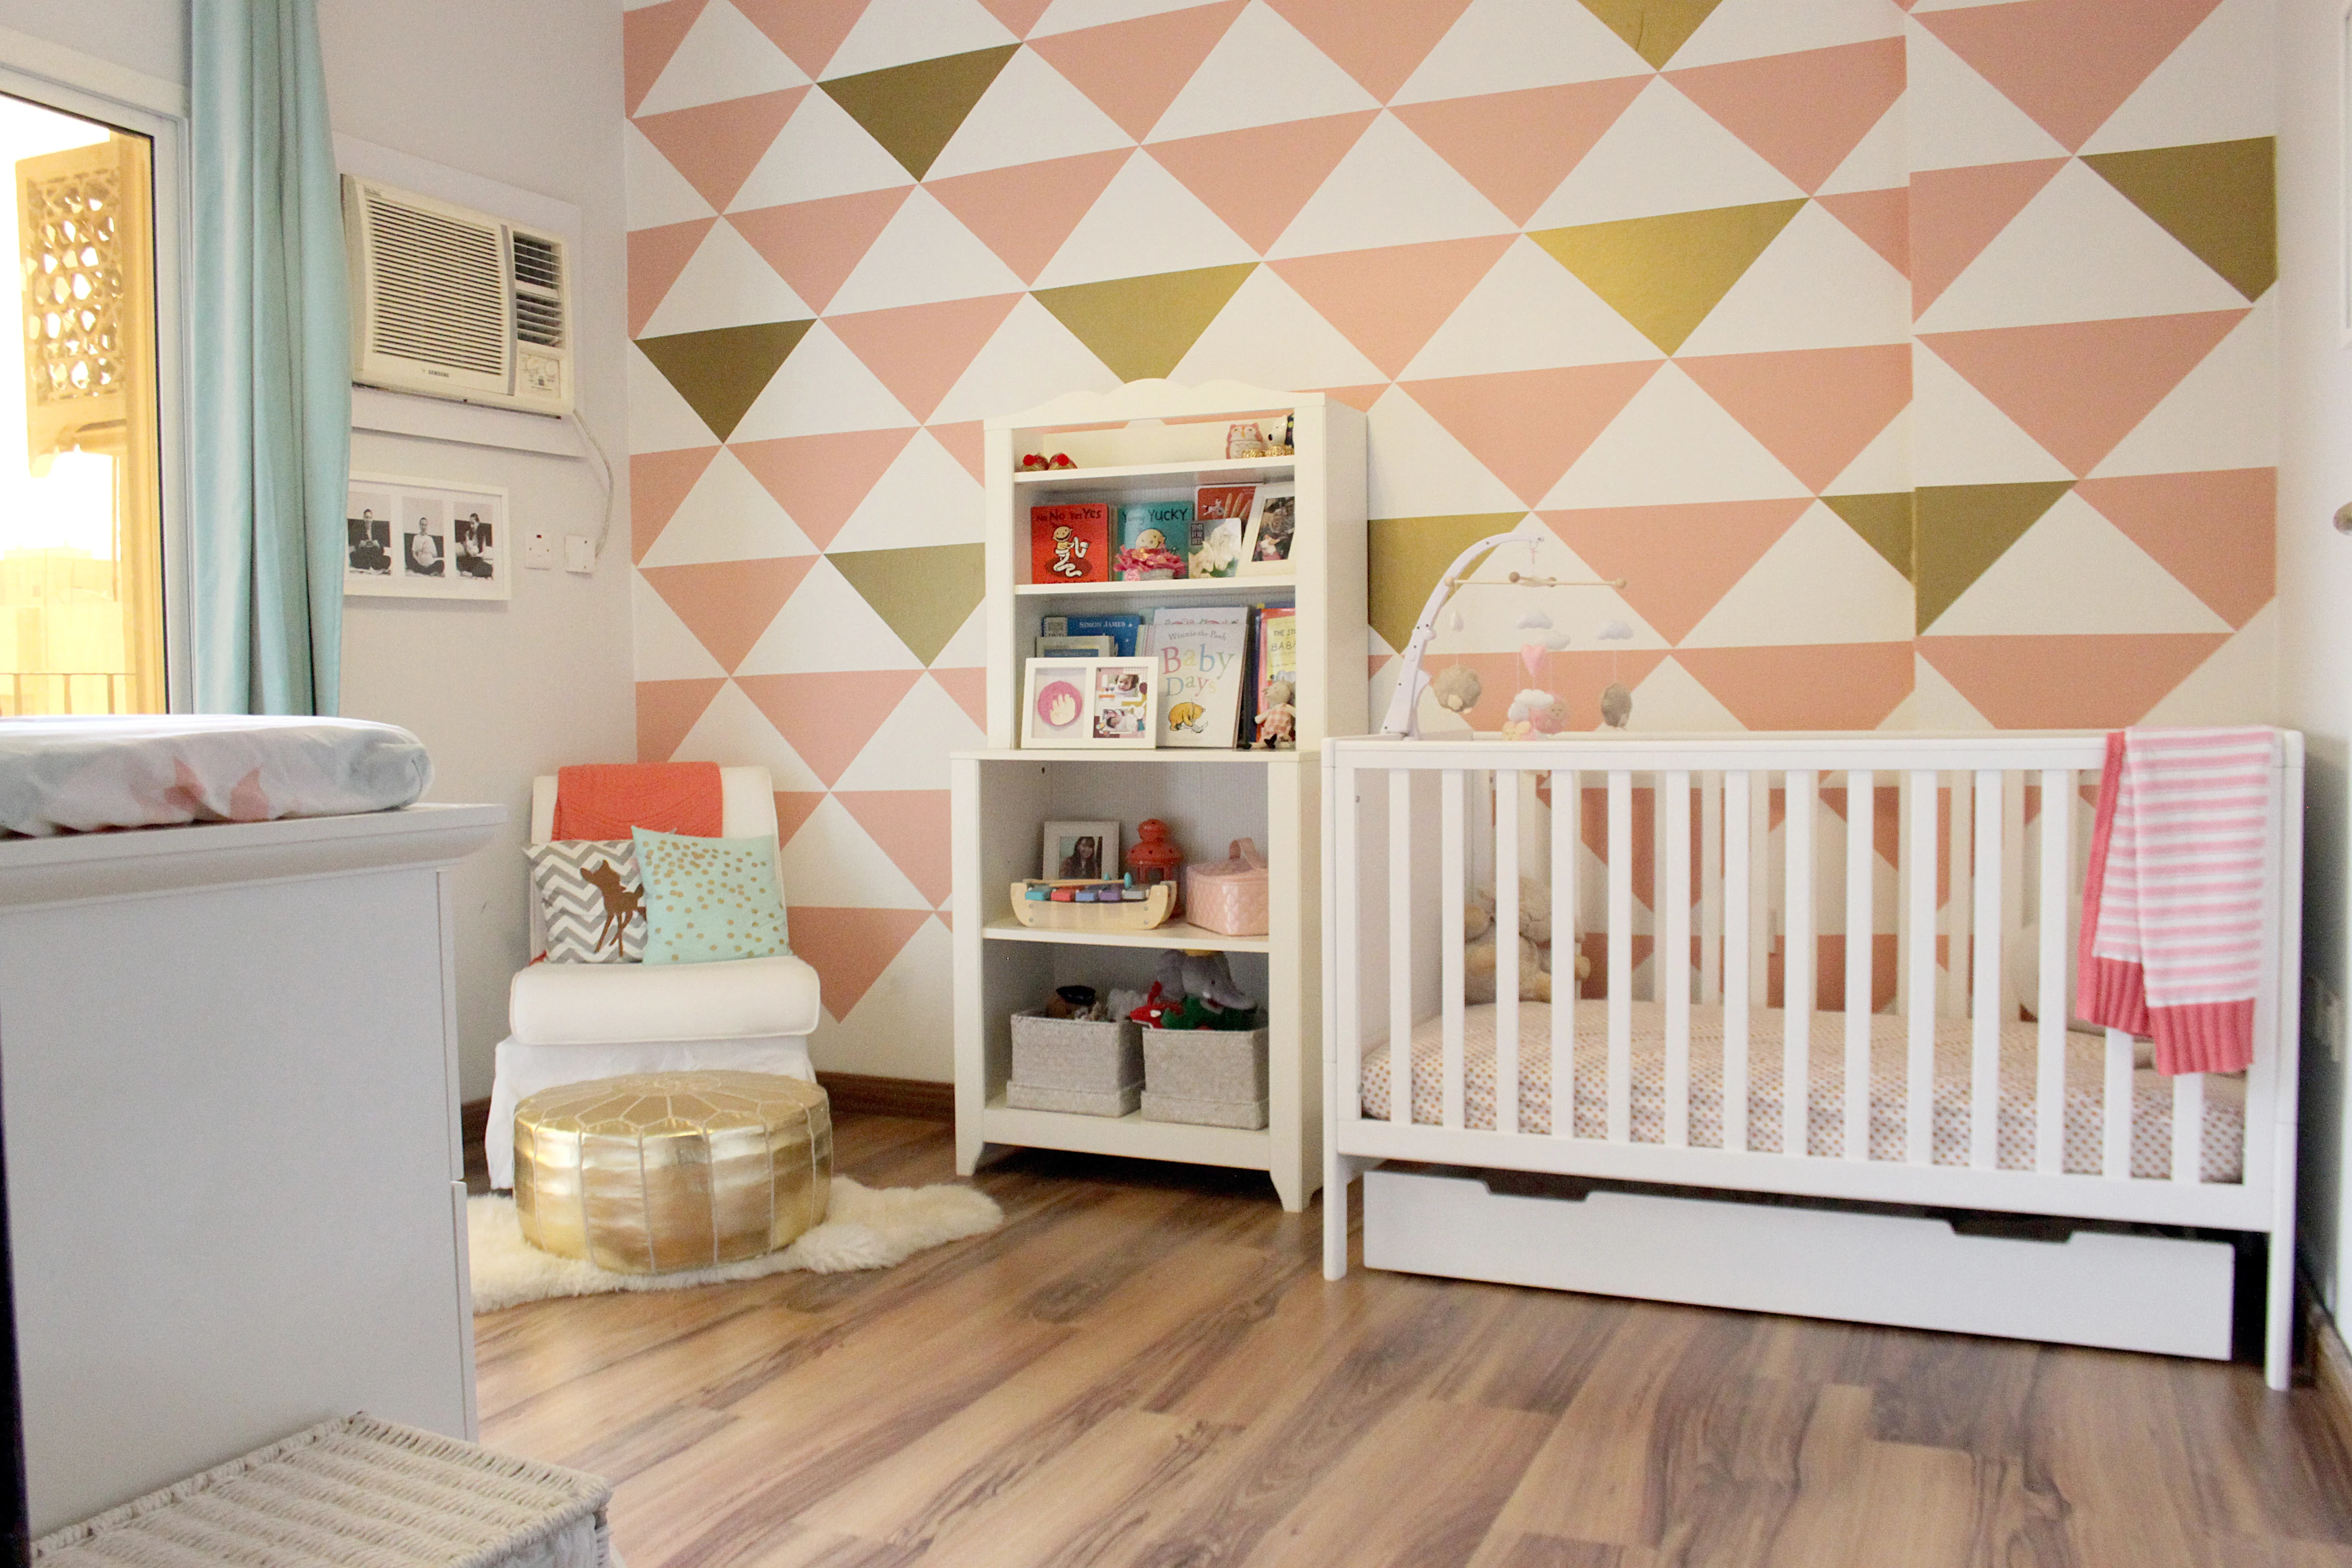 Peach and Mint Nursery with Triangle Decal Accent Wall